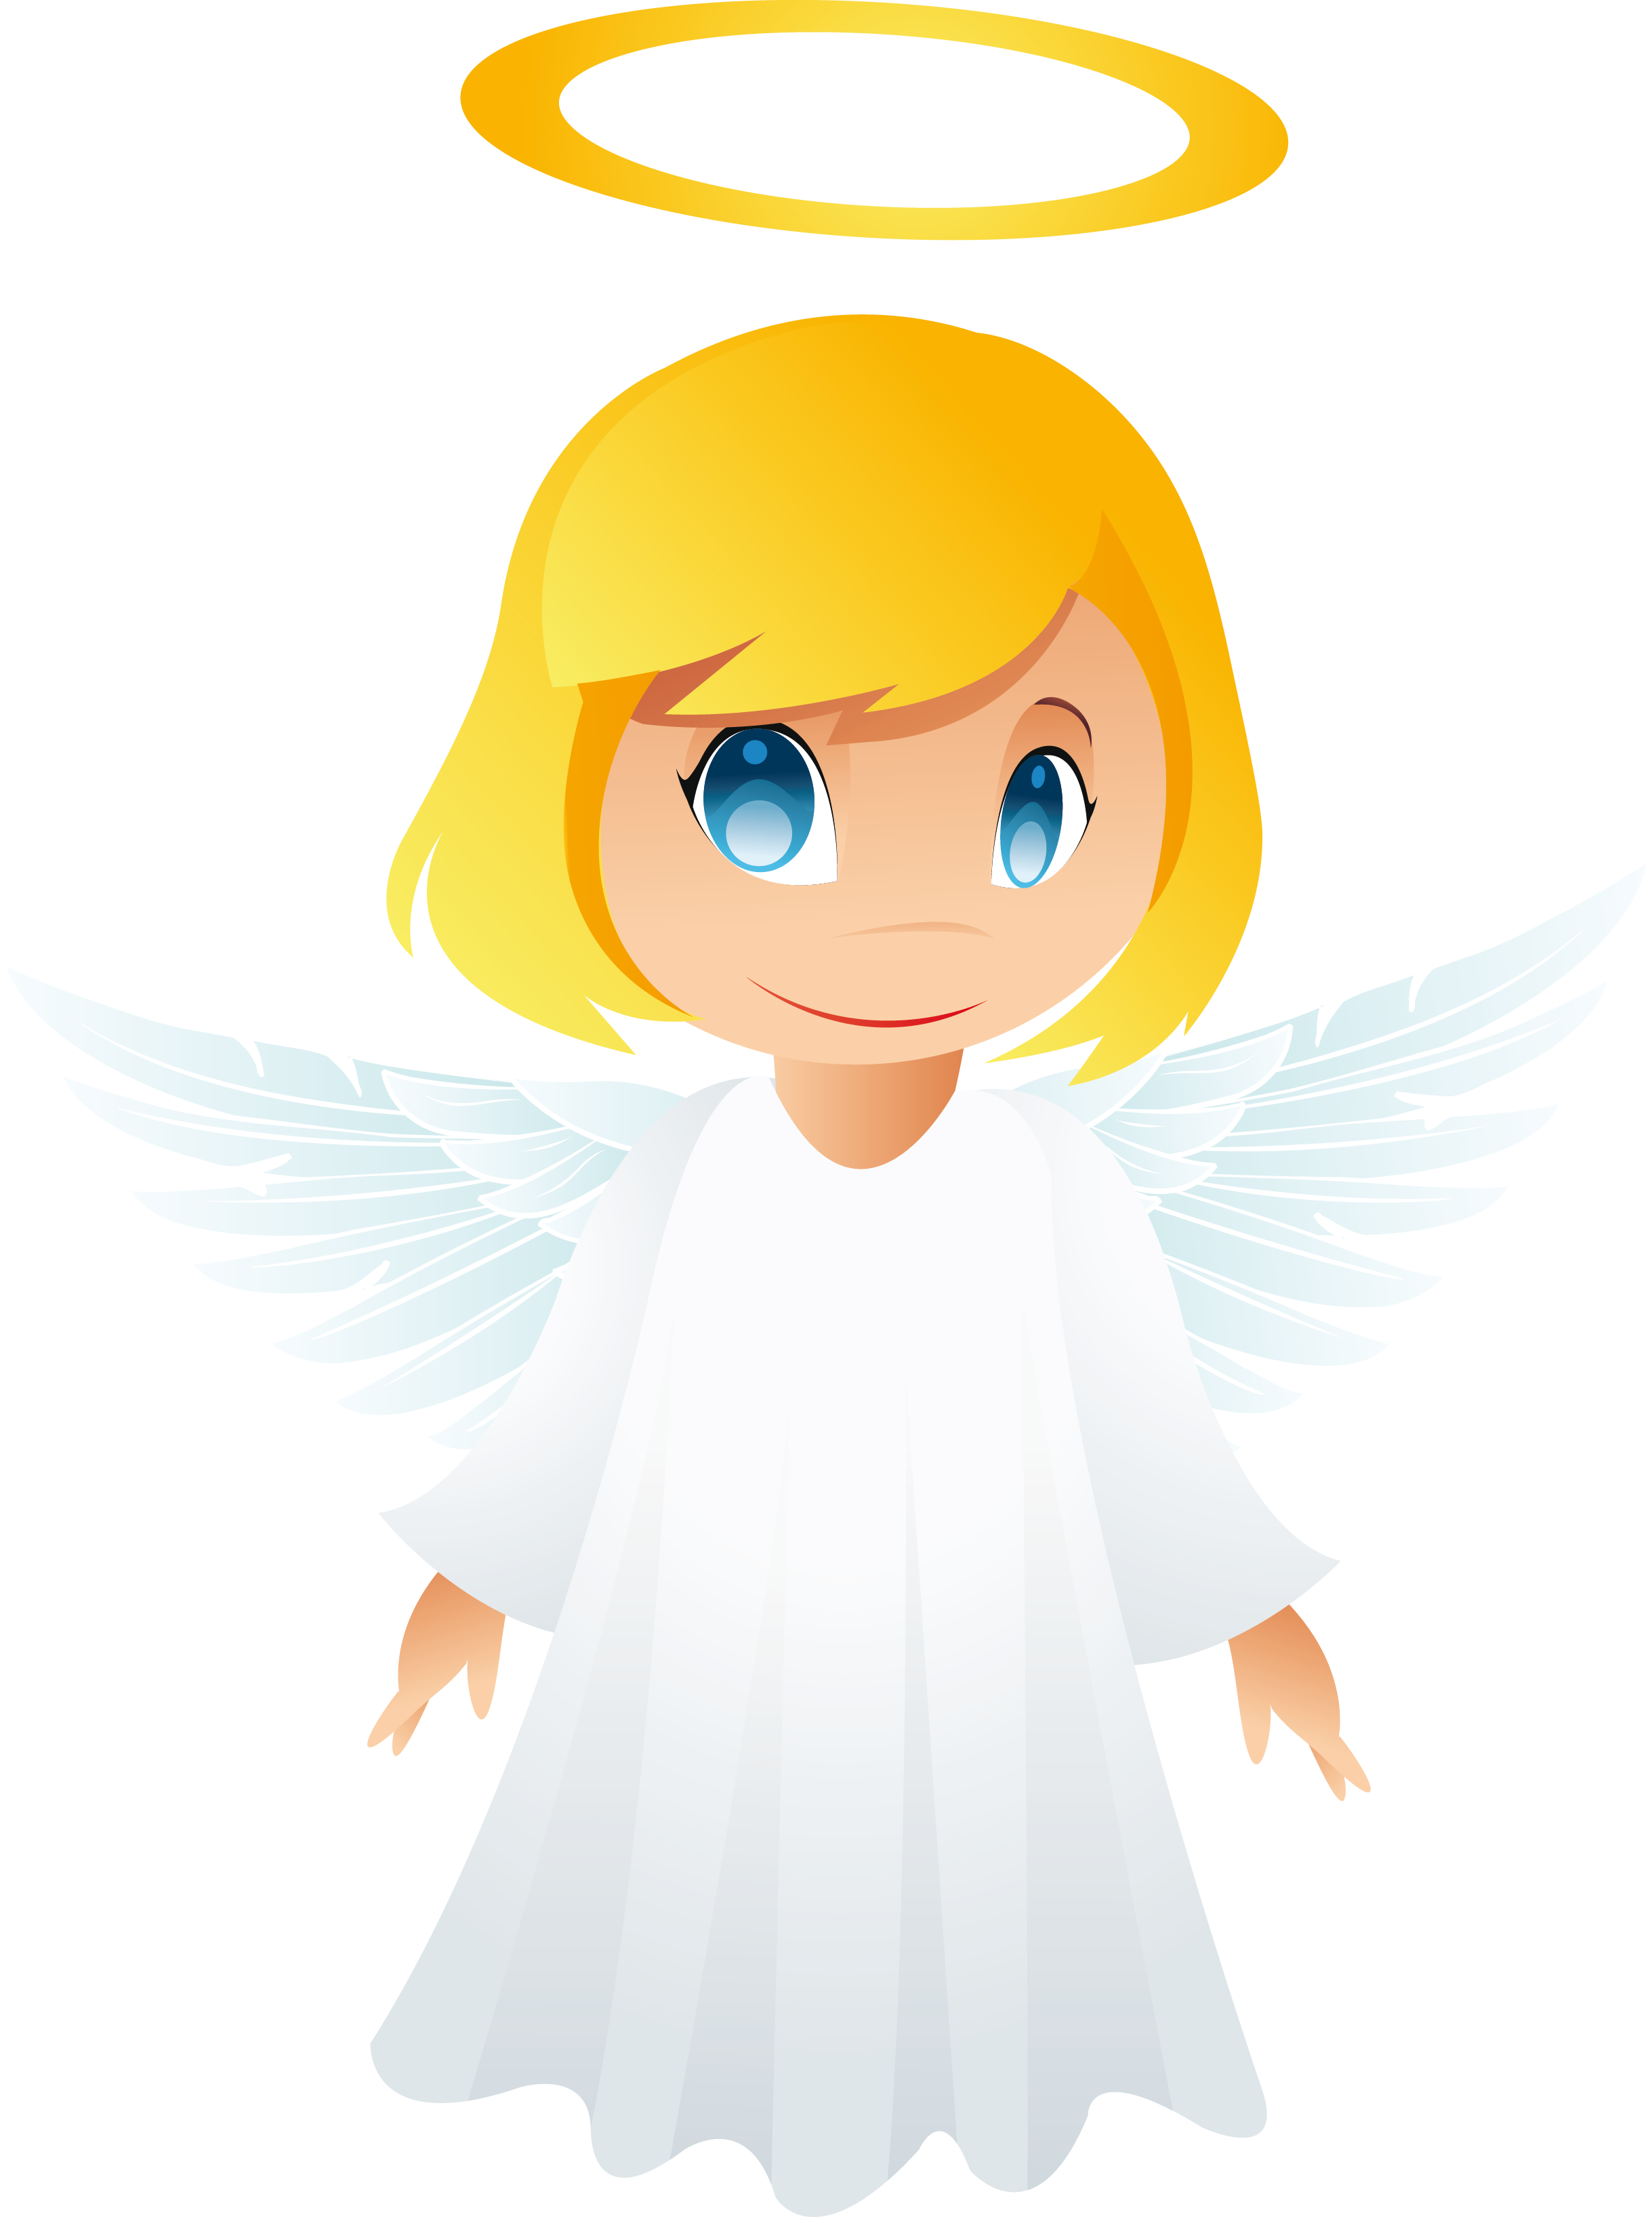 Angel clipart angeles.